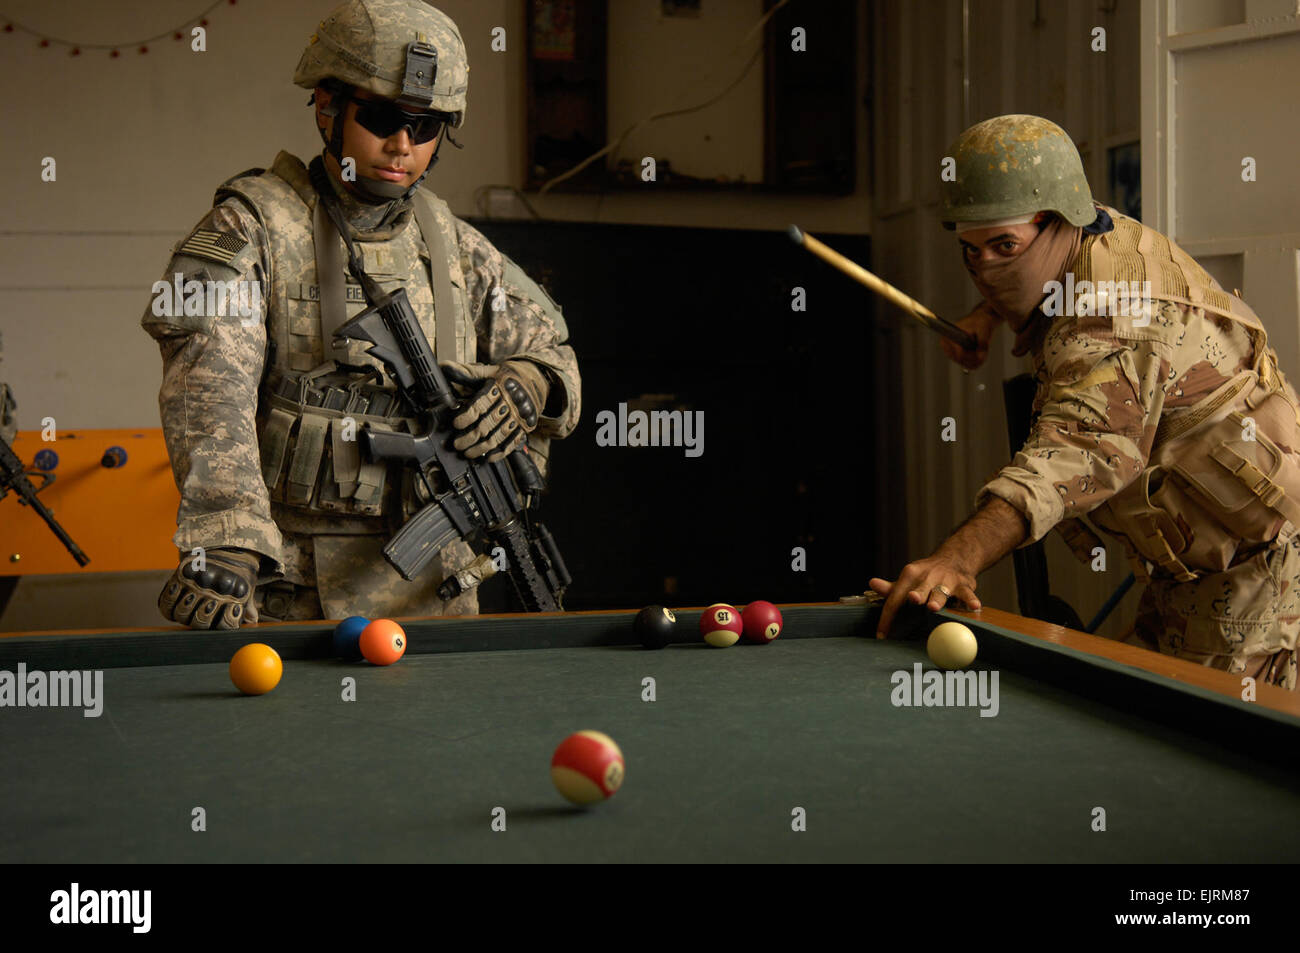 2nd Lt. Critchfield, 1st Platoon, Comanche Company, 2nd Battalion, 8th Infantry Regiment, 4th Infantry Division, Fort Carson, Colo. and a soldier from the 8th division Iraqi army shoot a game of pool at a local arcade while conducting a joint dismounted patrol Oct. 10, 2008 in Ad Diwaniyah, Iraq. Stock Photo